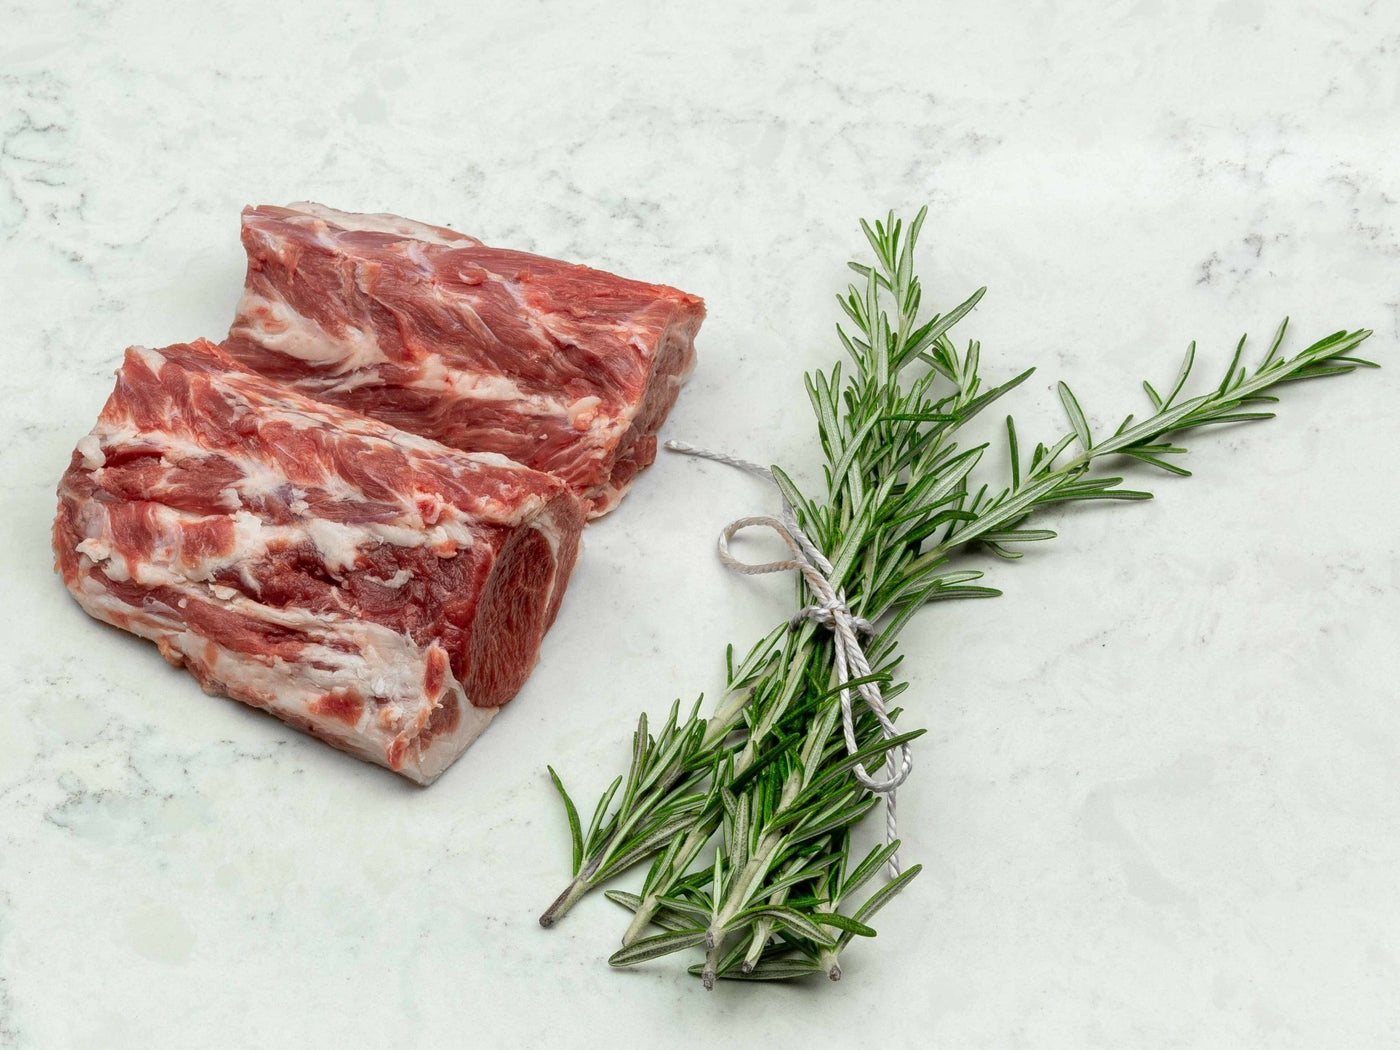 Grass Fed, Dry-Aged Lamb Neck Fillet - Lamb - Thomas Joseph Butchery - Ethical Dry-Aged Meat The Best Steak UK Thomas Joseph Butchery